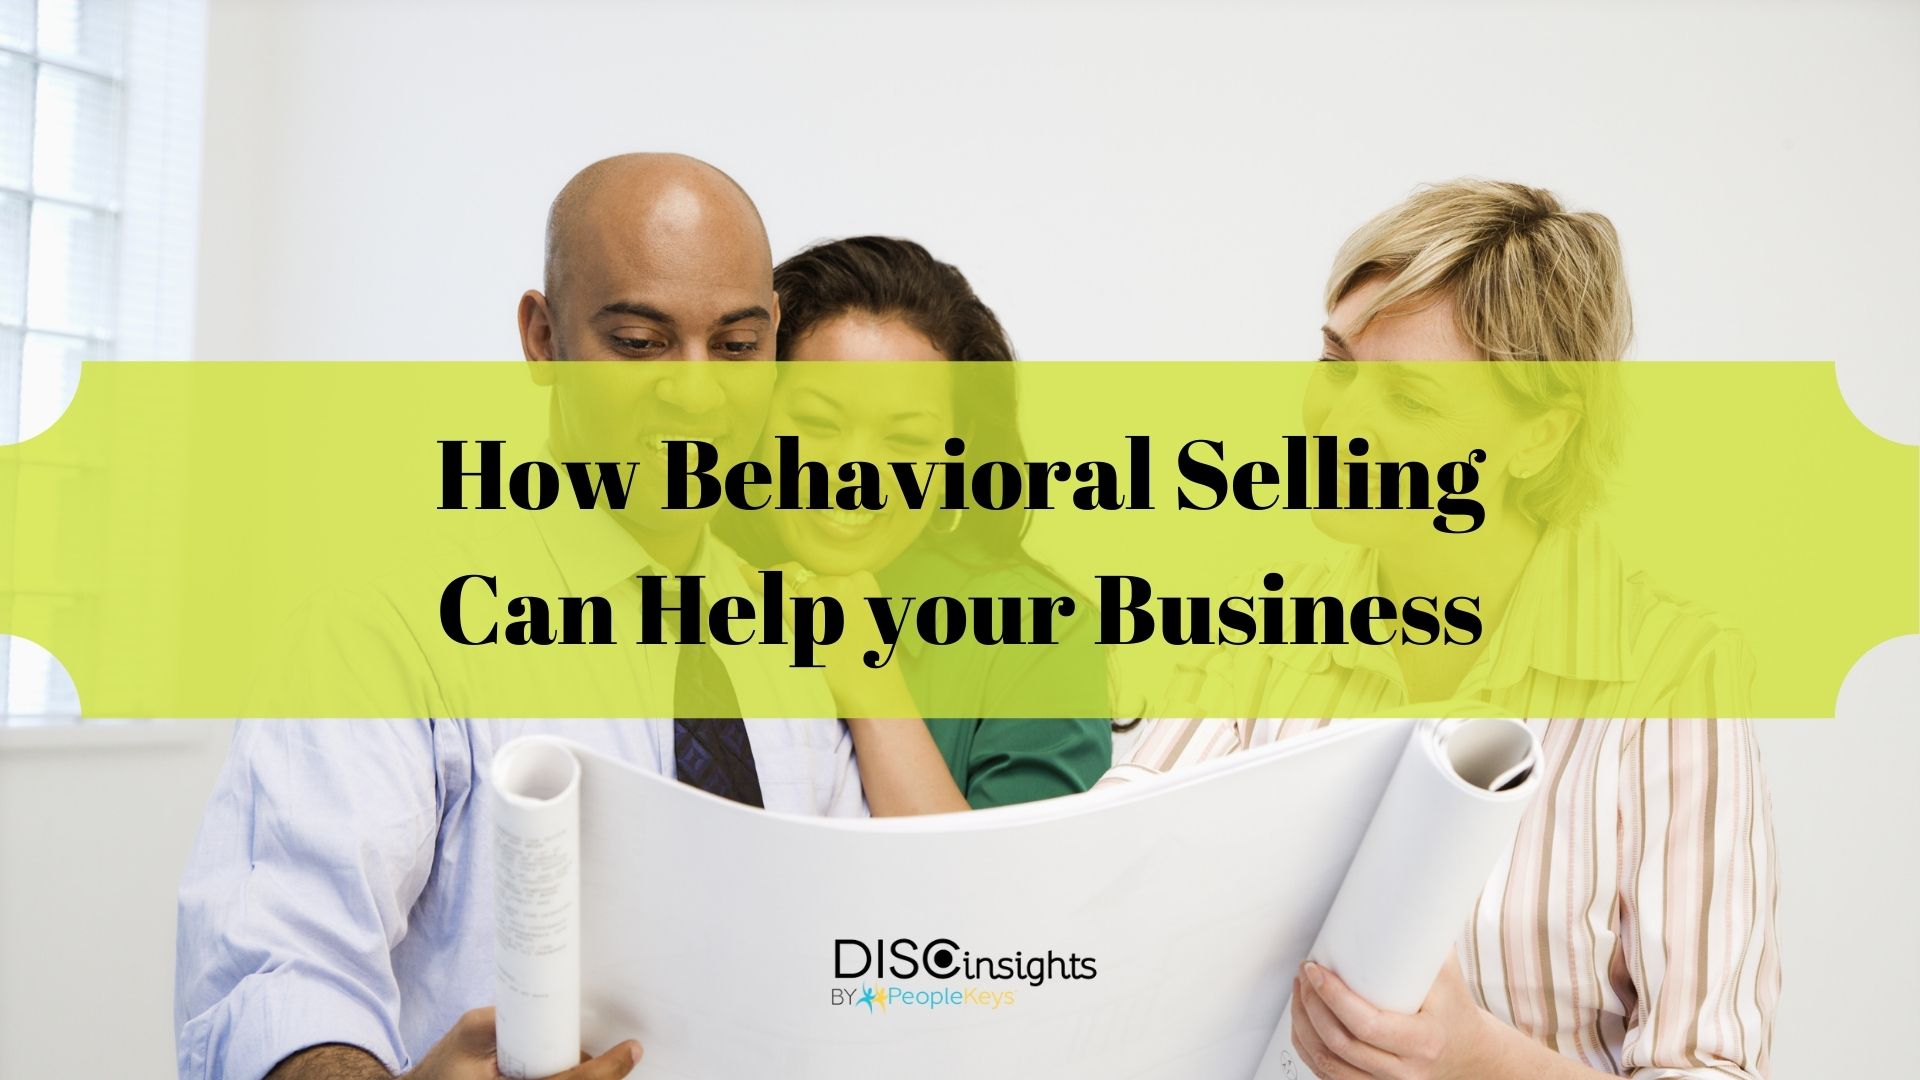 DI Blog How behavioral selling can help your business